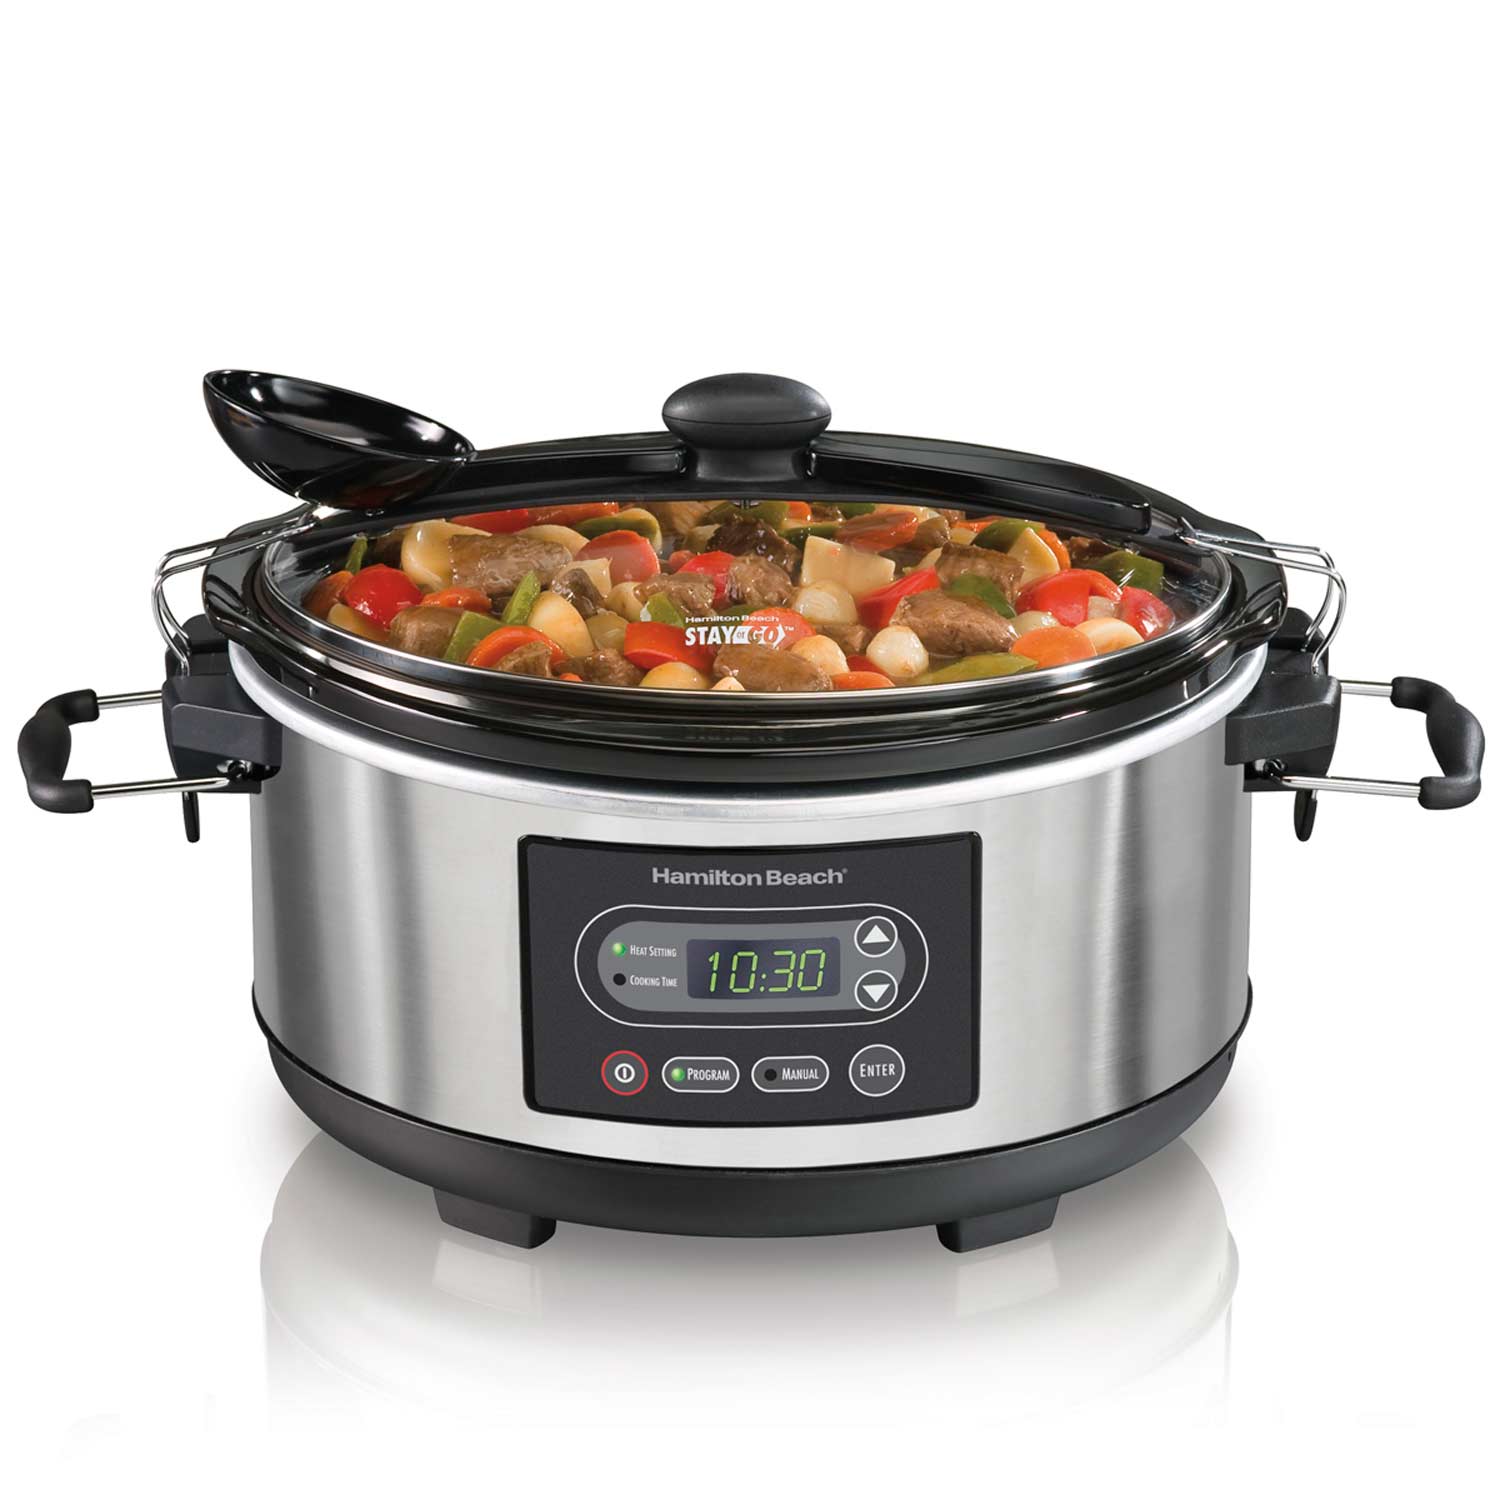 Stay or Go® 5 Quart Programmable Slow Cooker (33957)